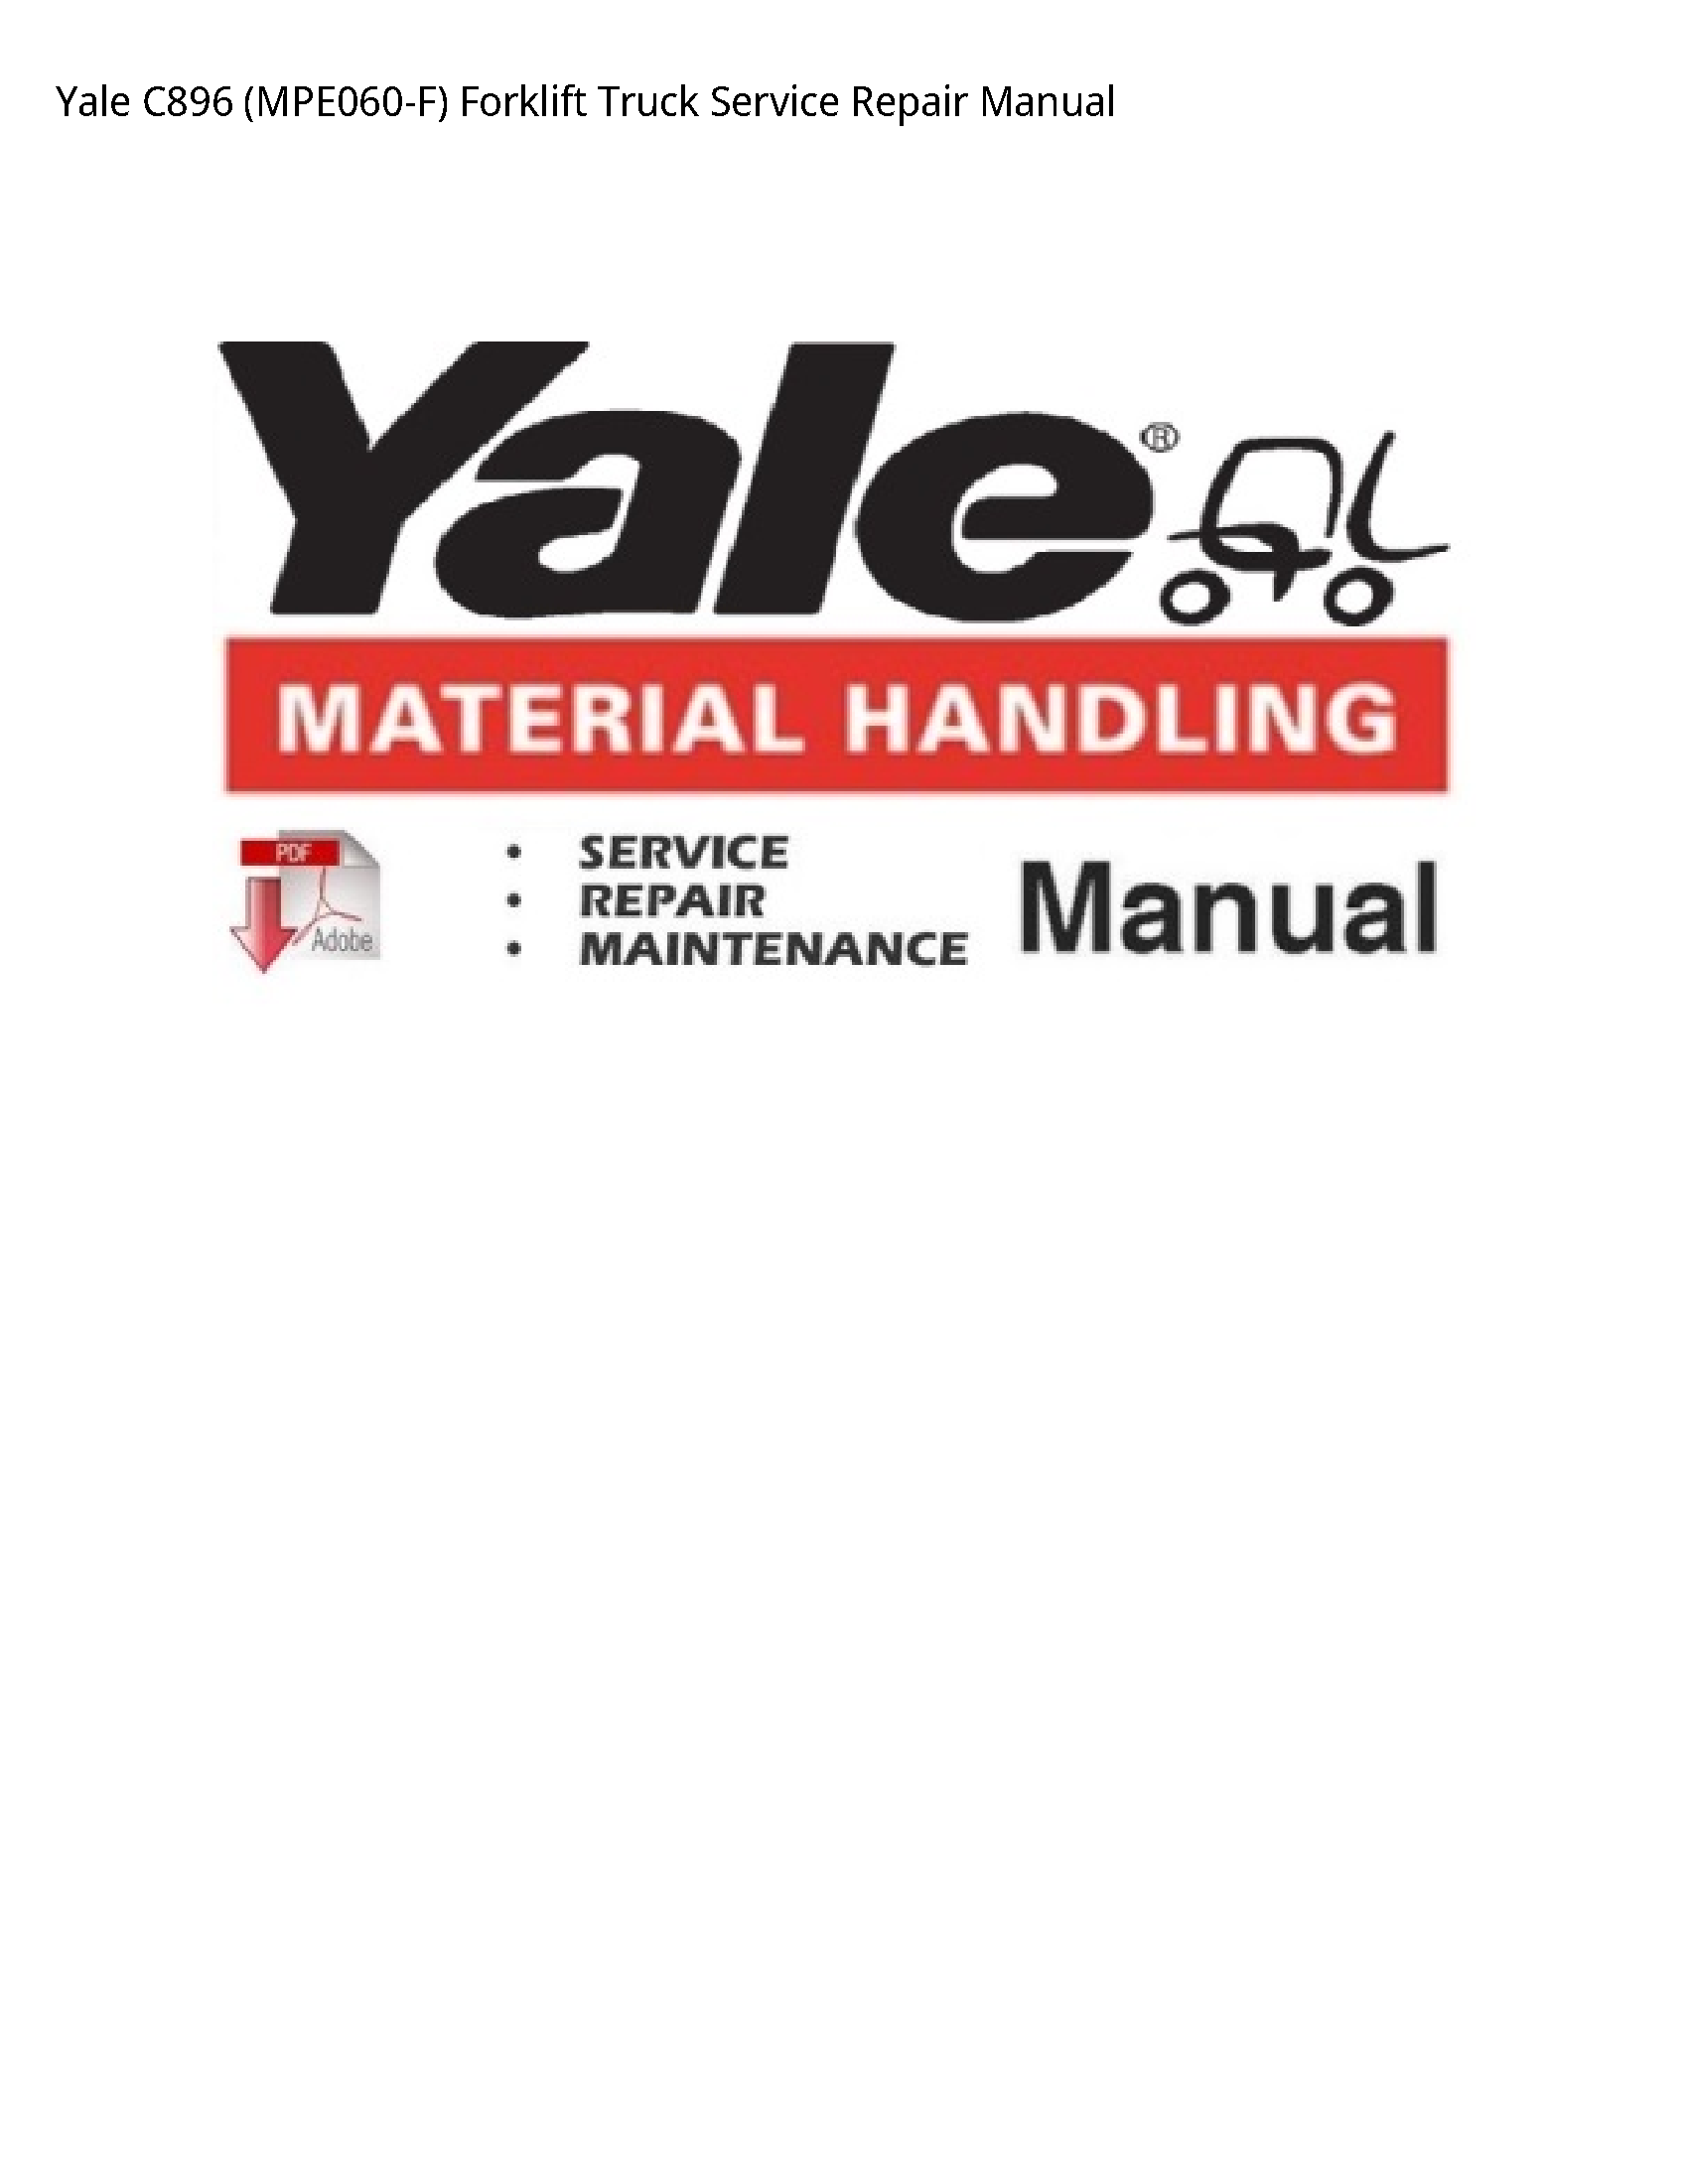 Yale C896 Forklift Truck manual